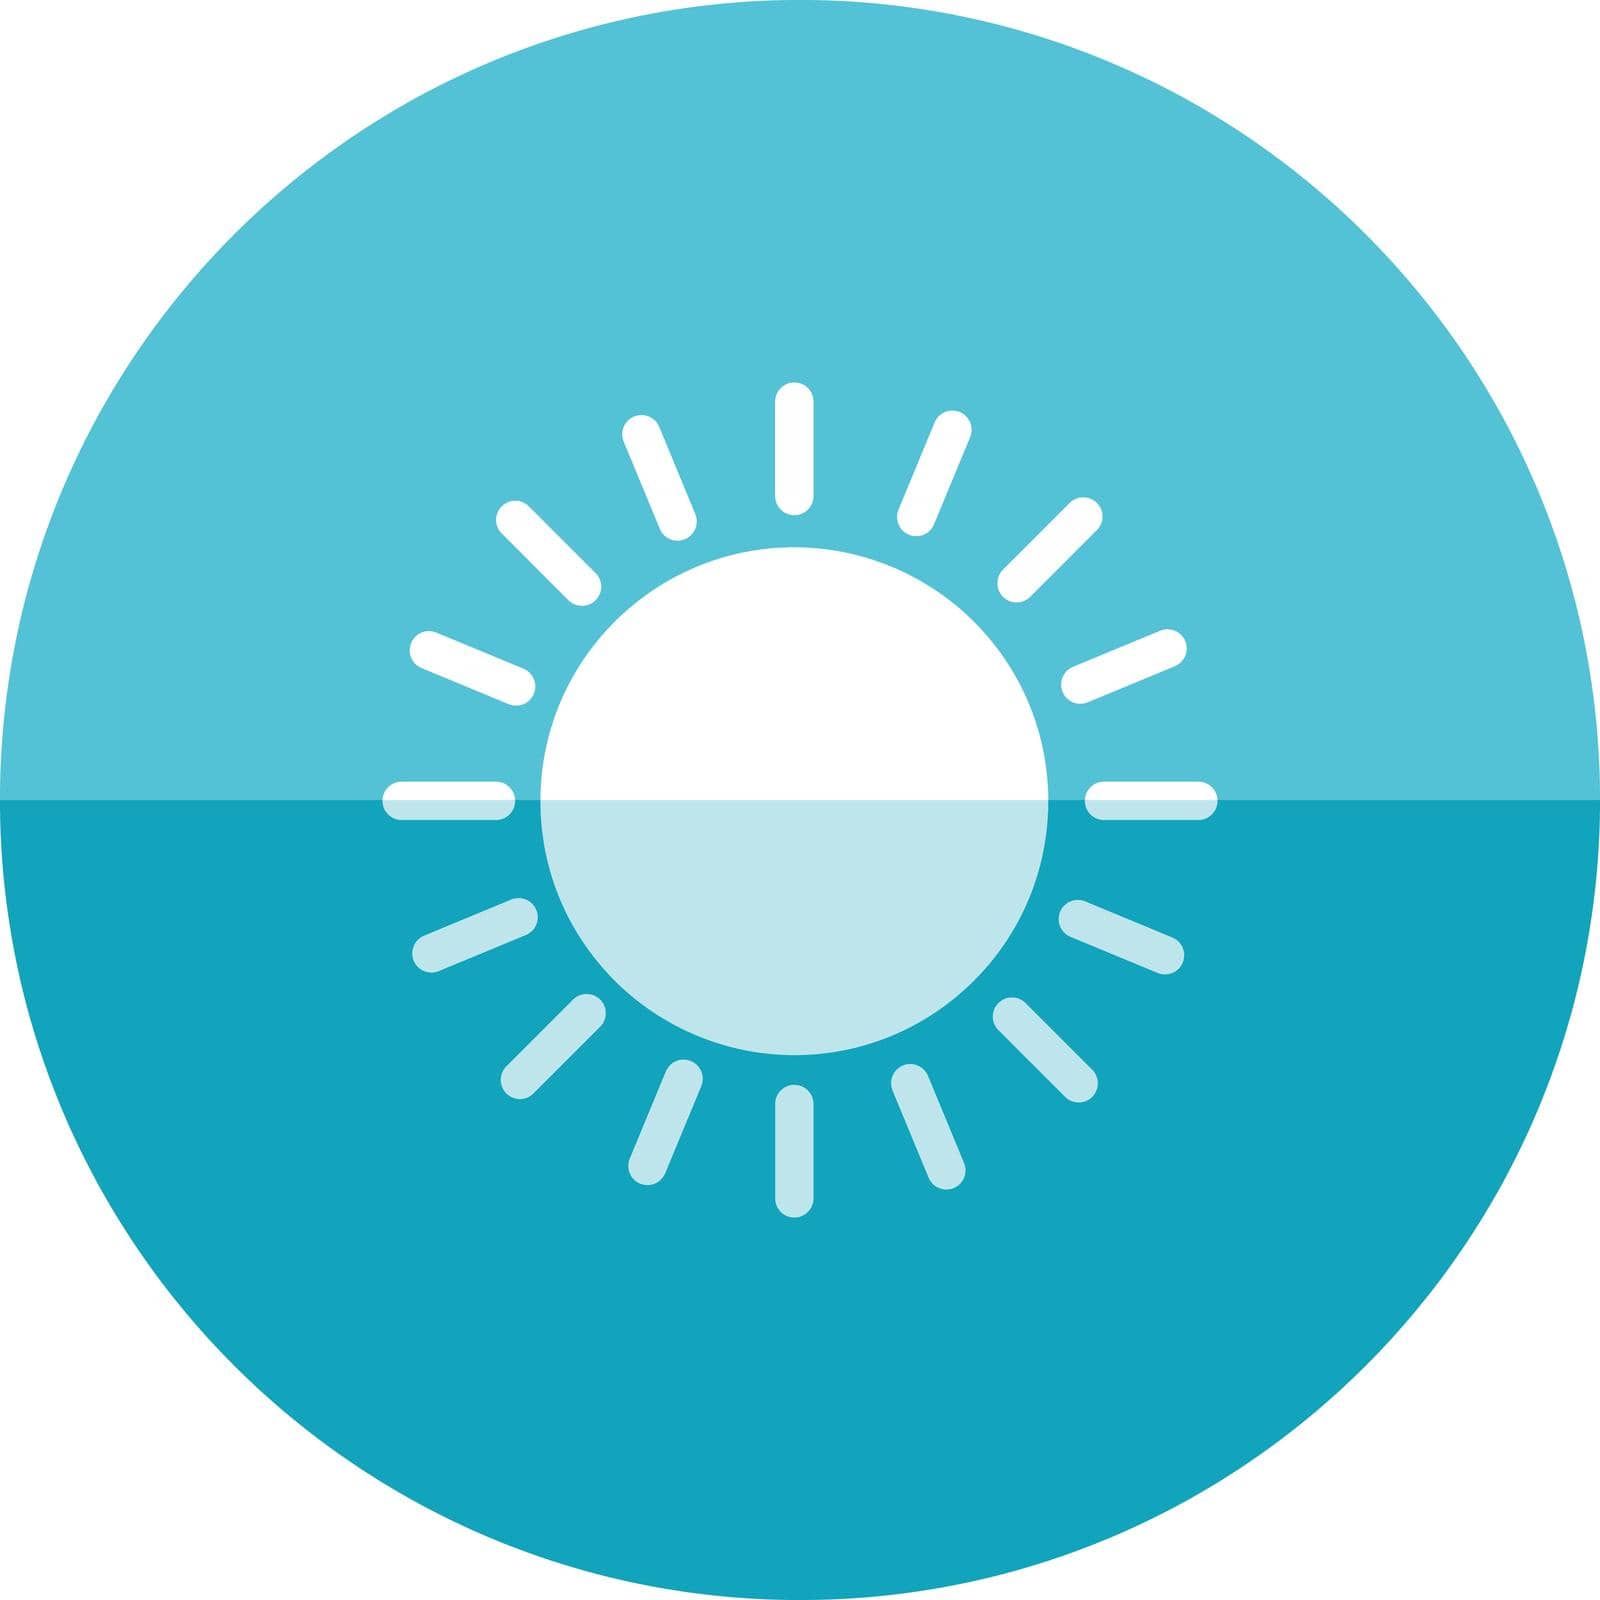 Weather forecast partly sunny icon in flat color circle style.